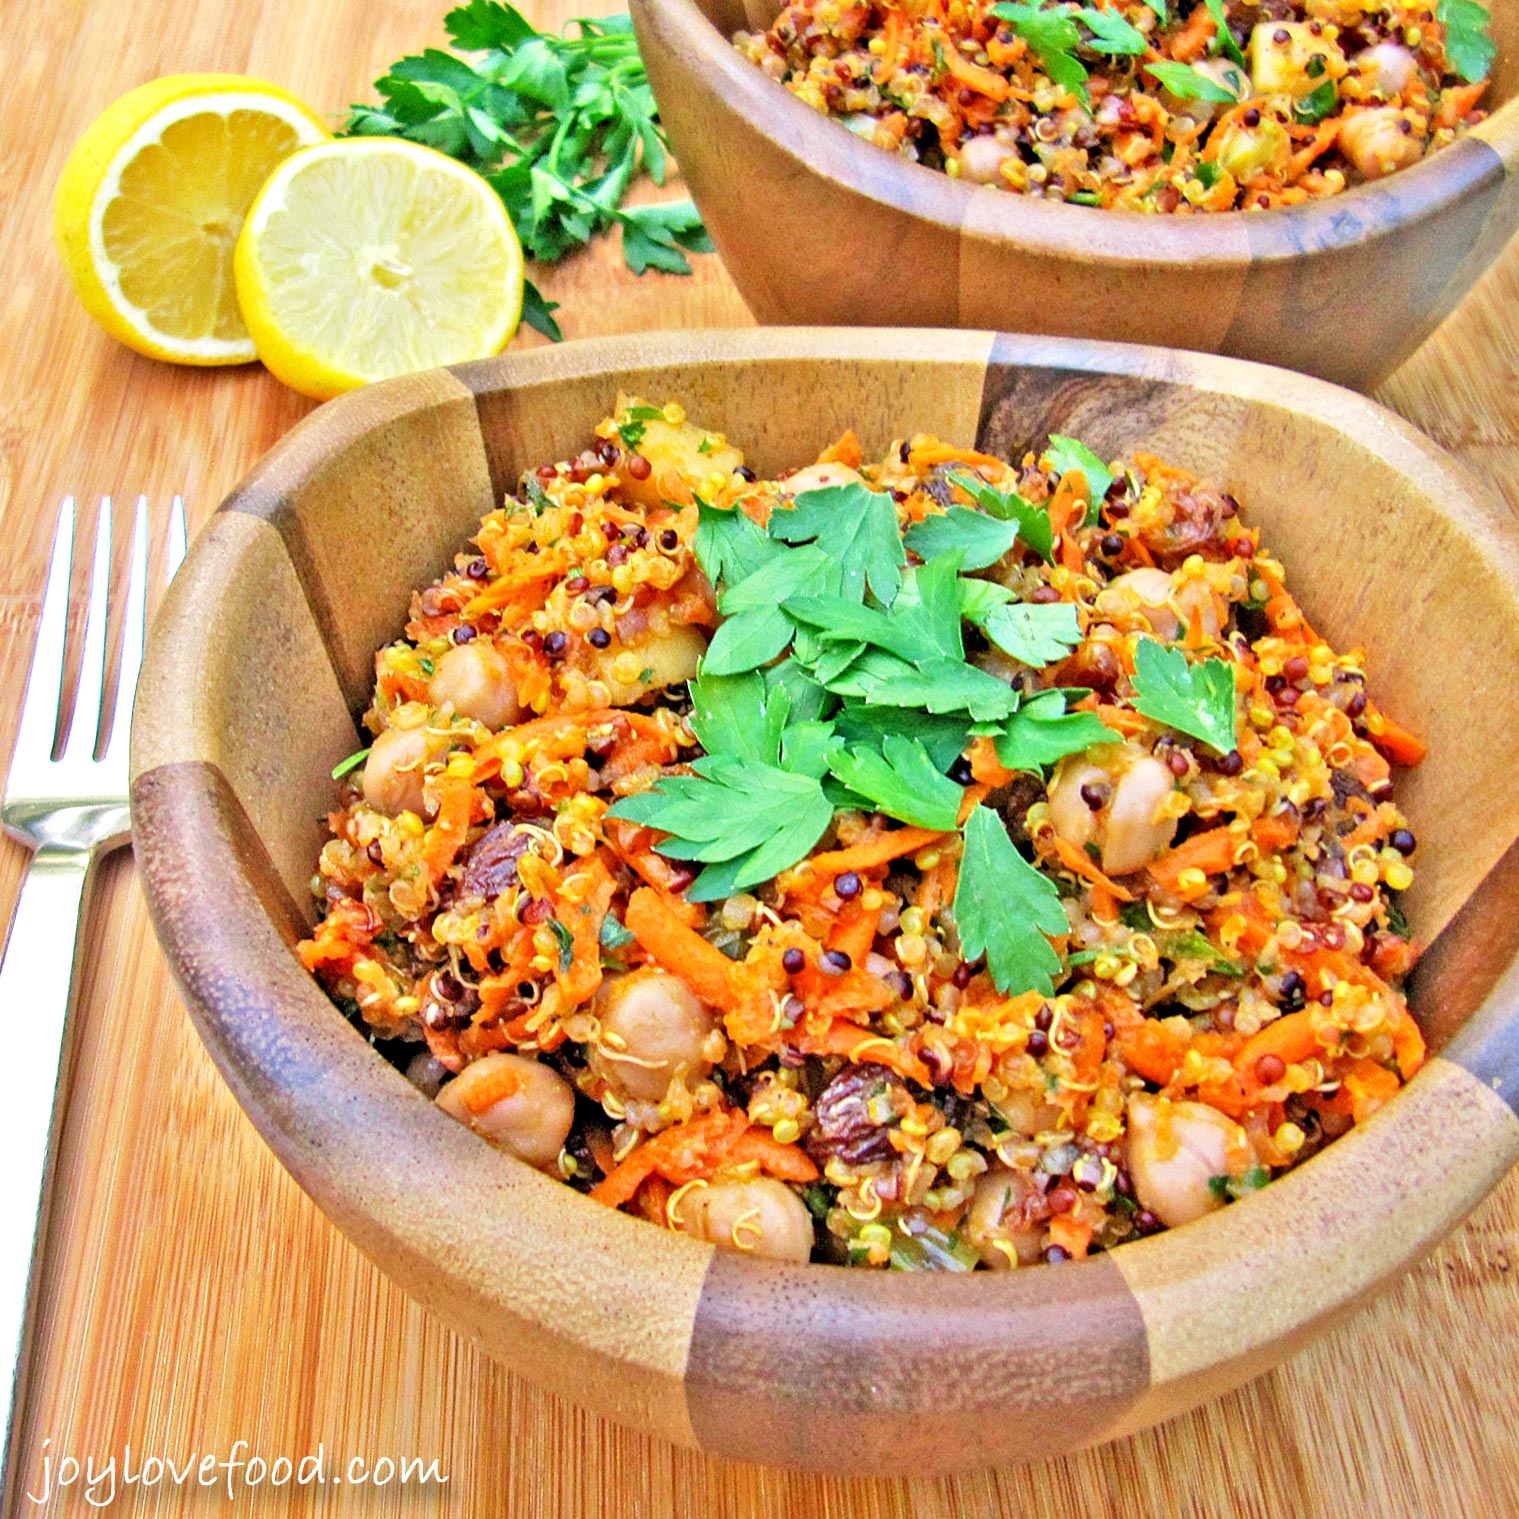 Curried Quinoa and Chickpea Salad with Carrots, Apples & Raisins